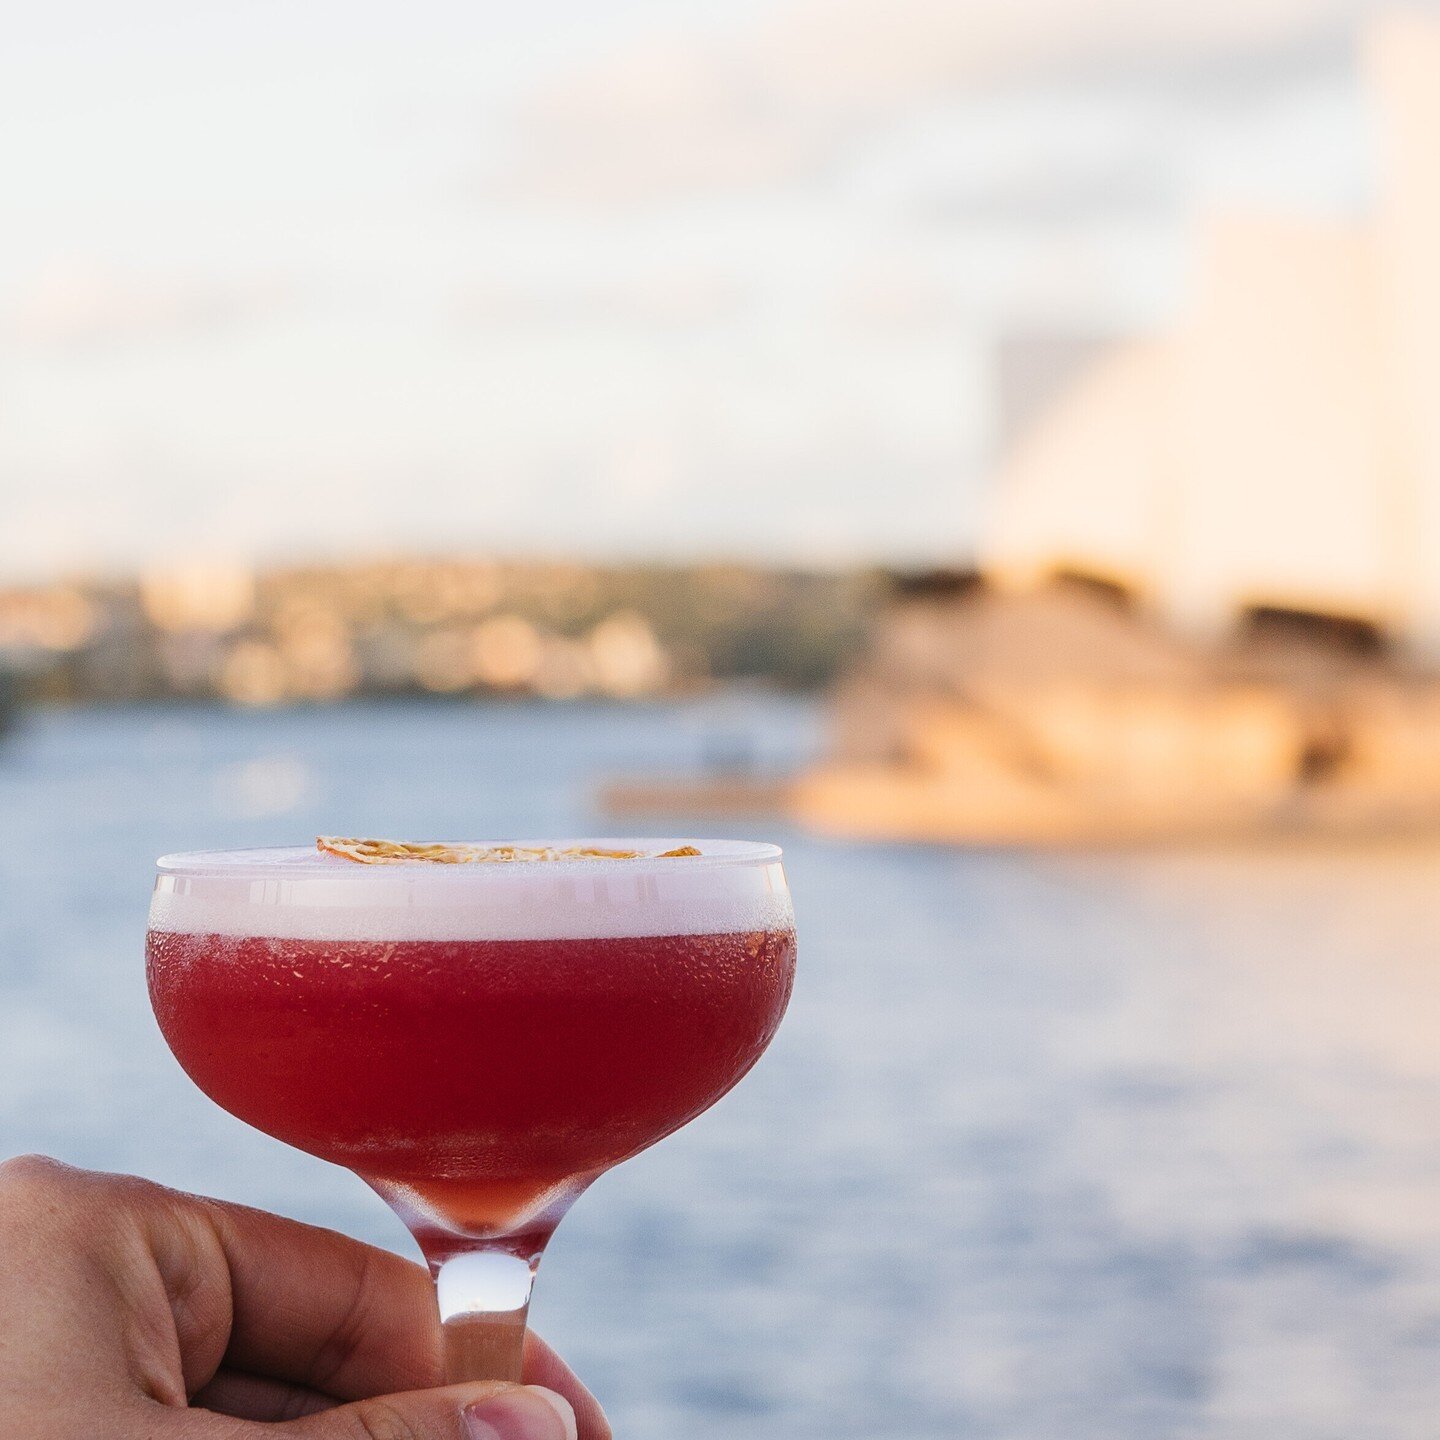 All you need is a bit of colour 💜 Cocktails with a view - what's better on a Sunday? We're open until late.